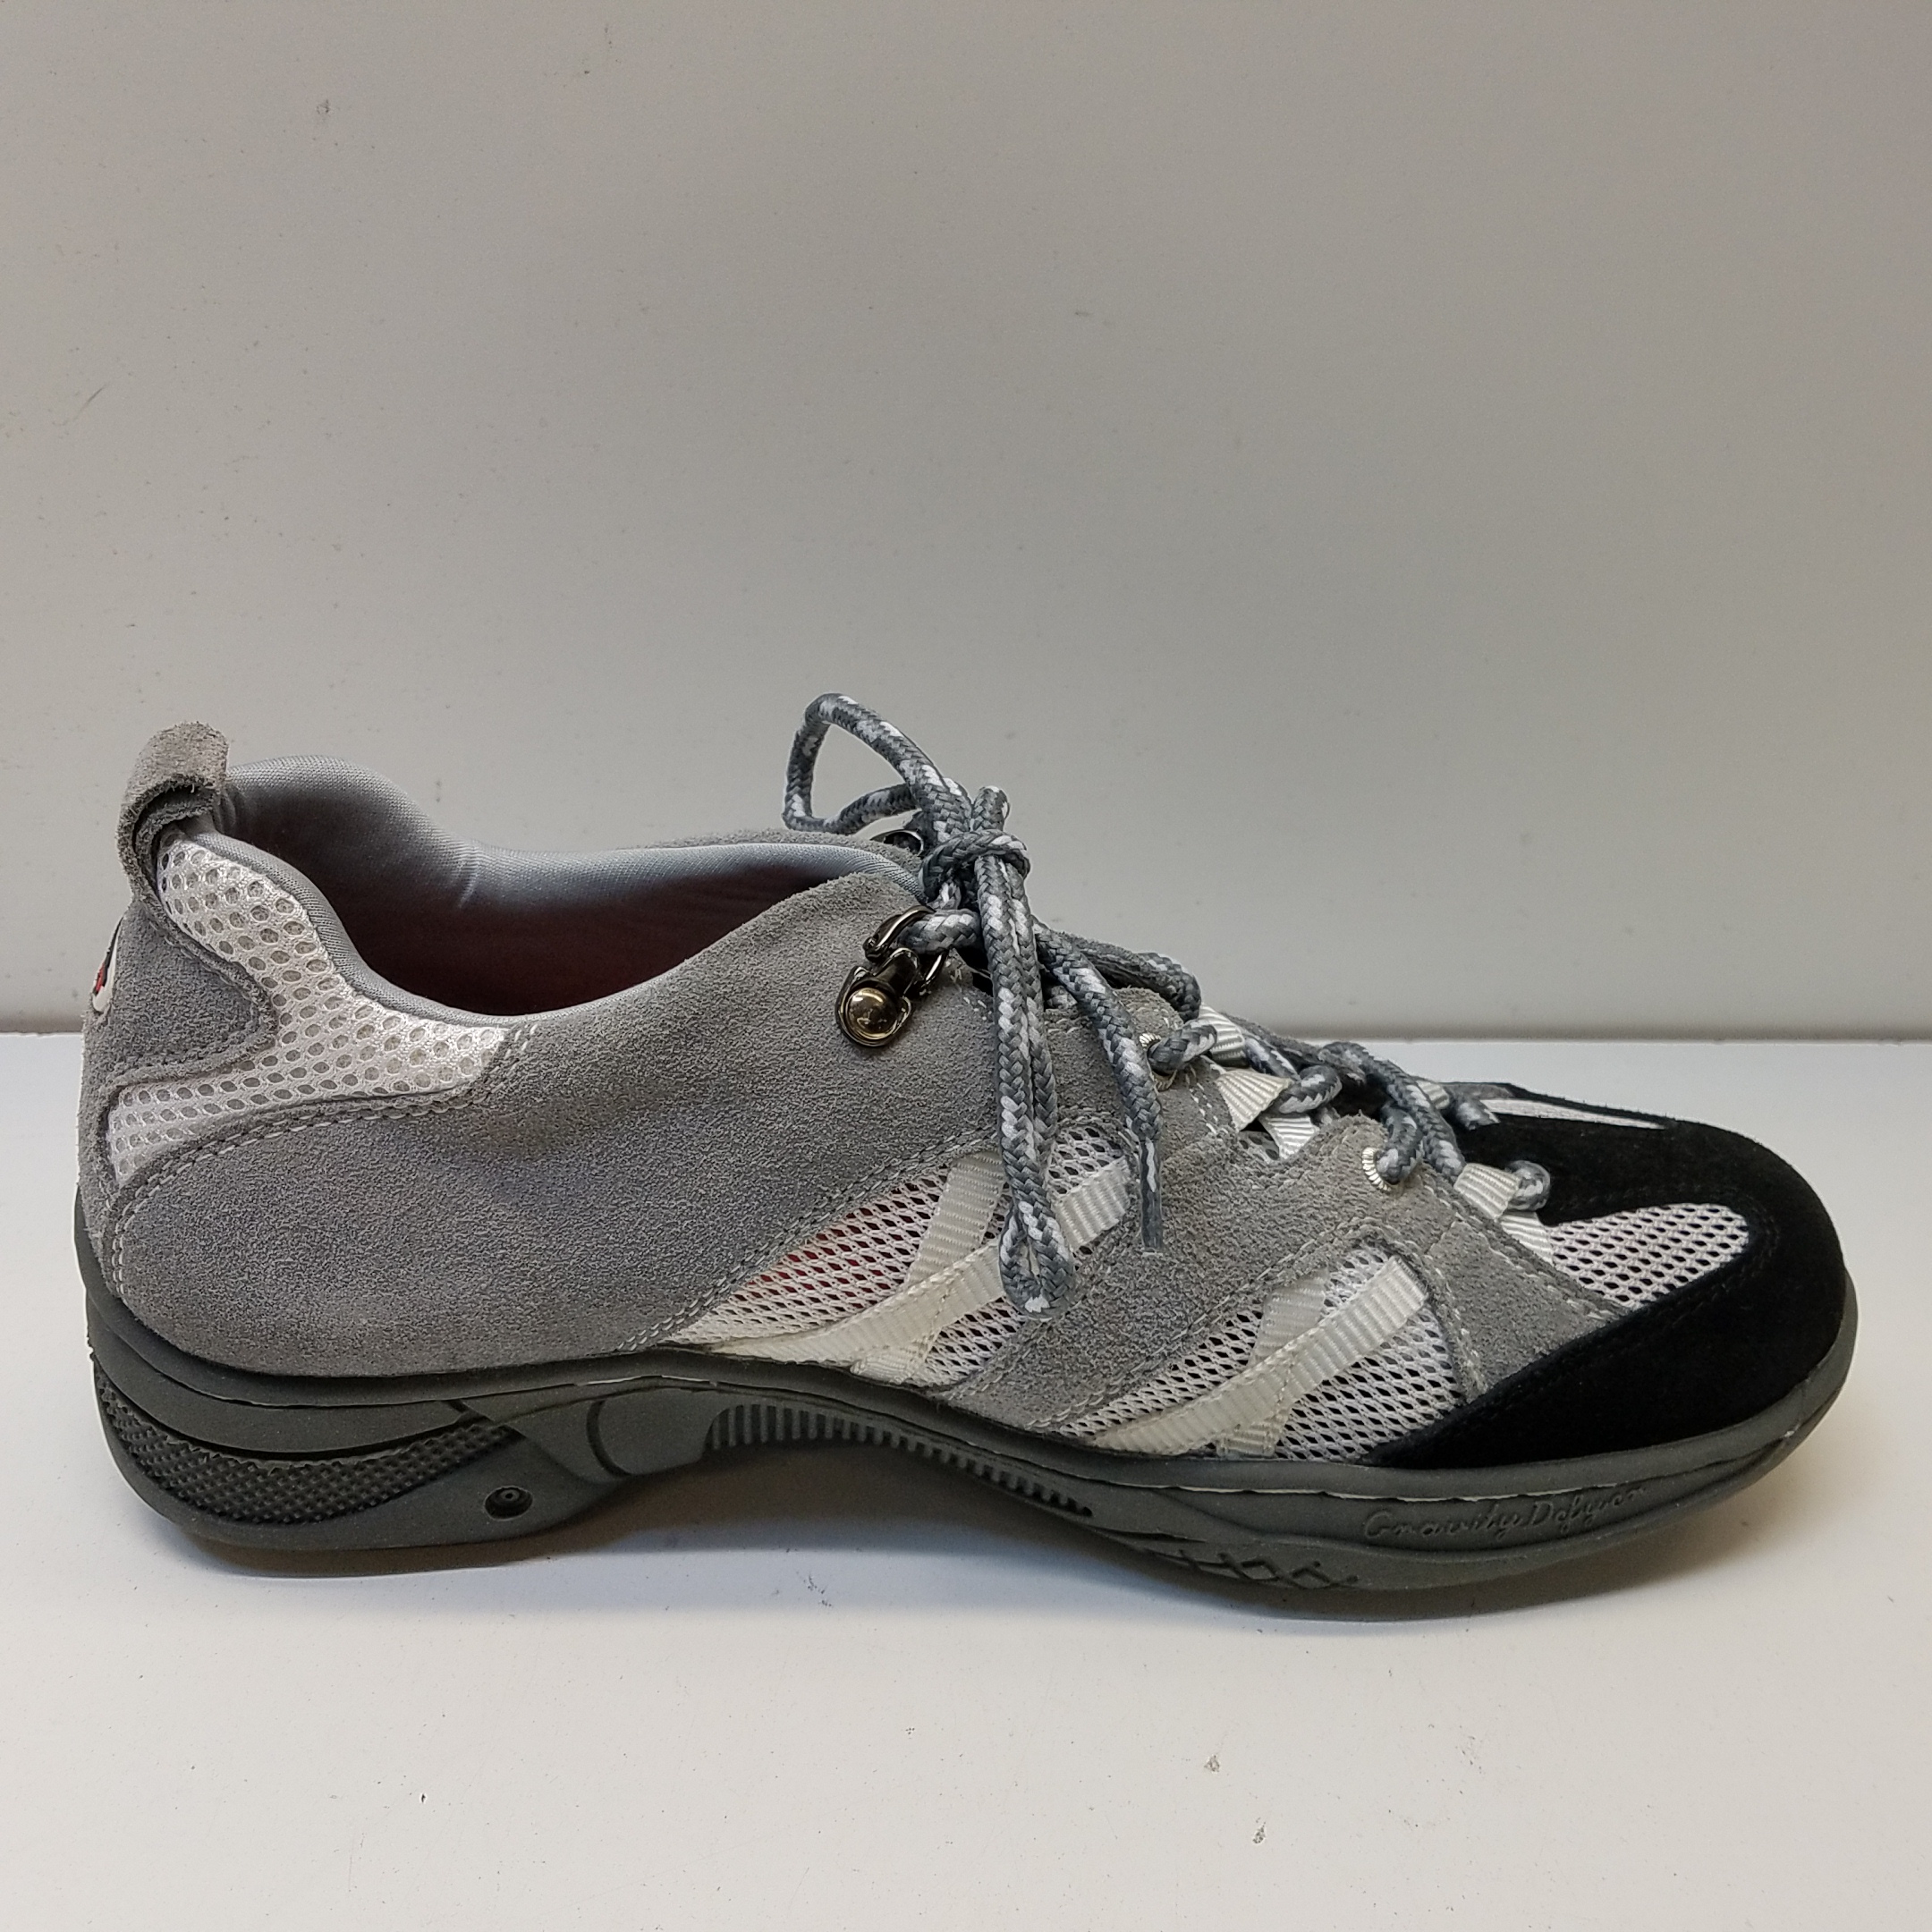 Buy the GDEFY Gravity Defyers Athletic Shoes Size Men's 8.5 | GoodwillFinds